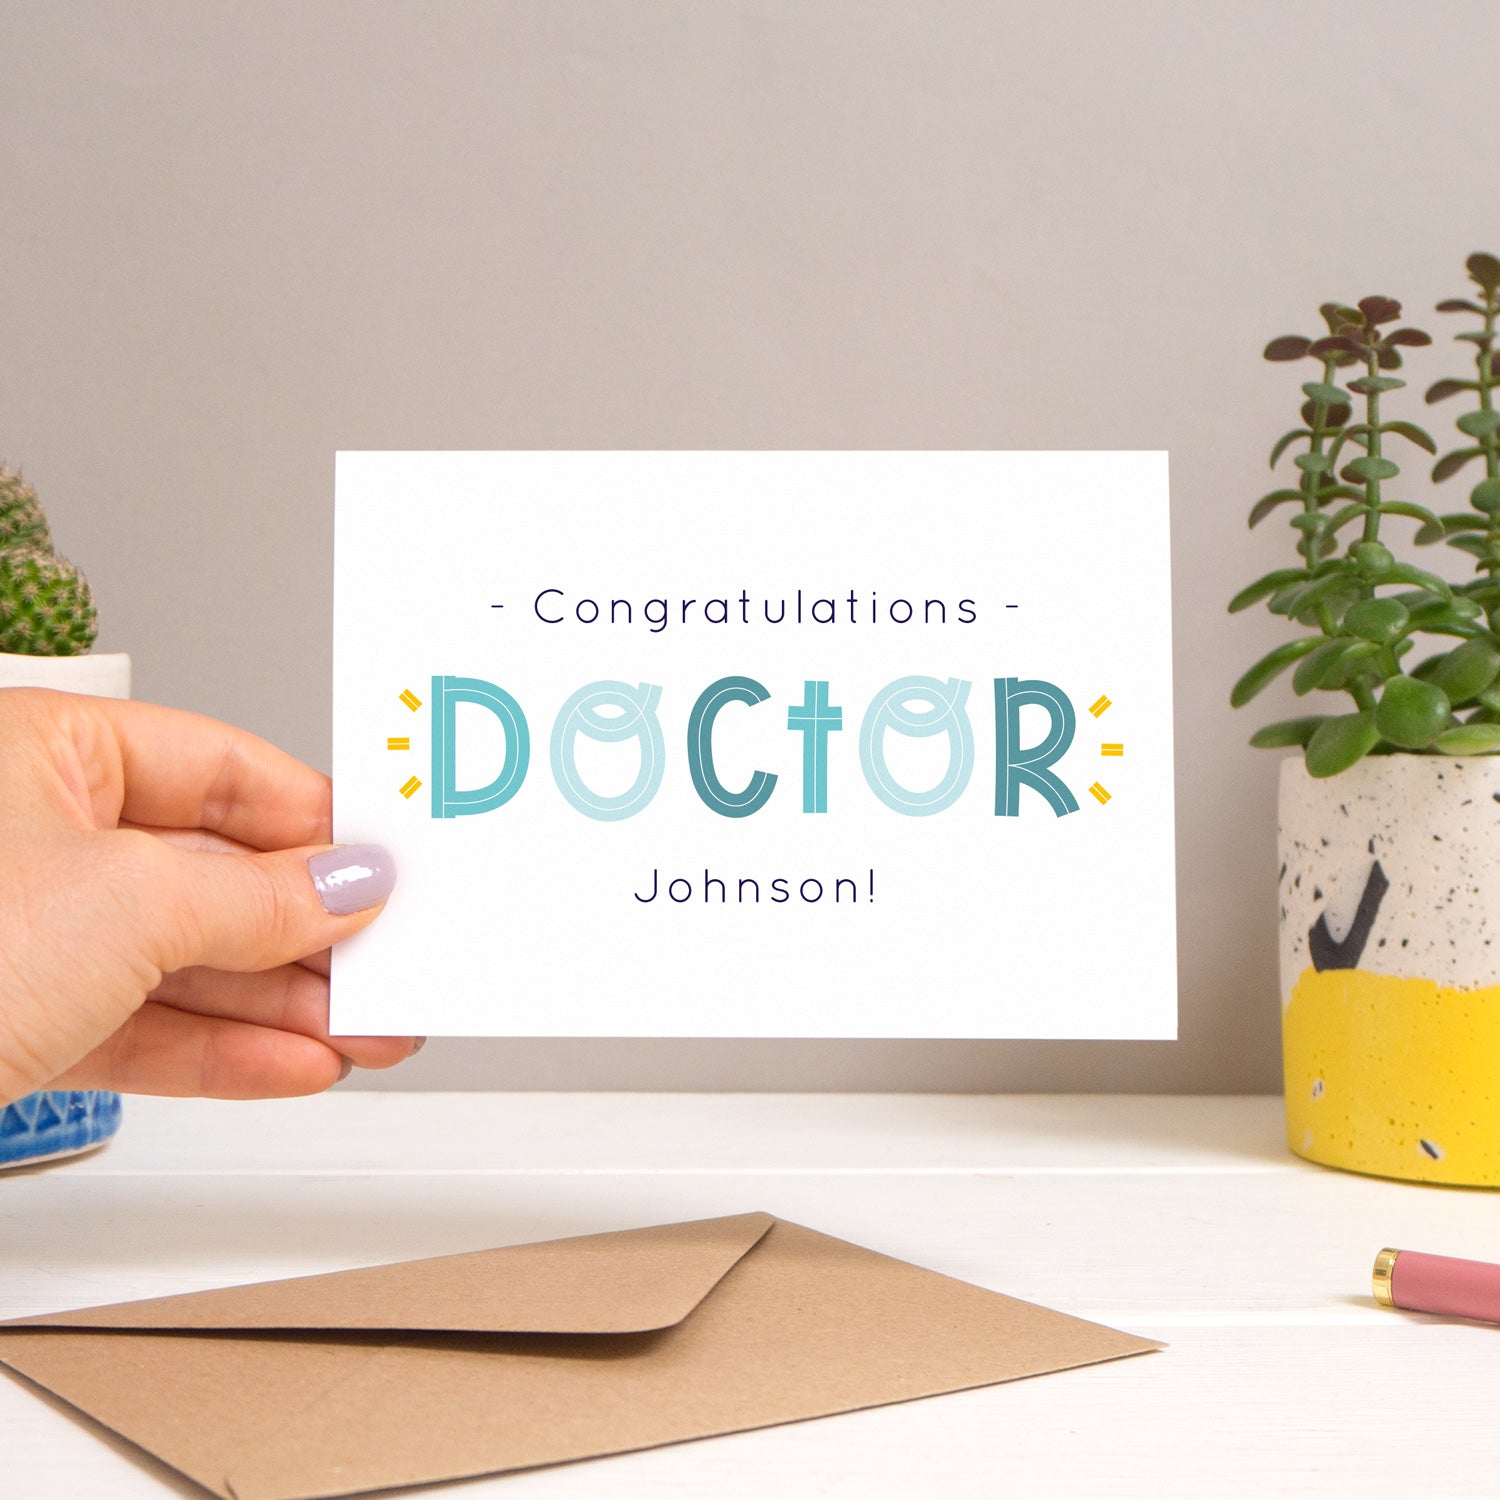 A personalised doctor card held over a warm grey and white background with potted plants peeping the sides. Behind the card is a kraft brown envelope that comes with the card. The text on this version of the card is in varying tones of navy and blue.